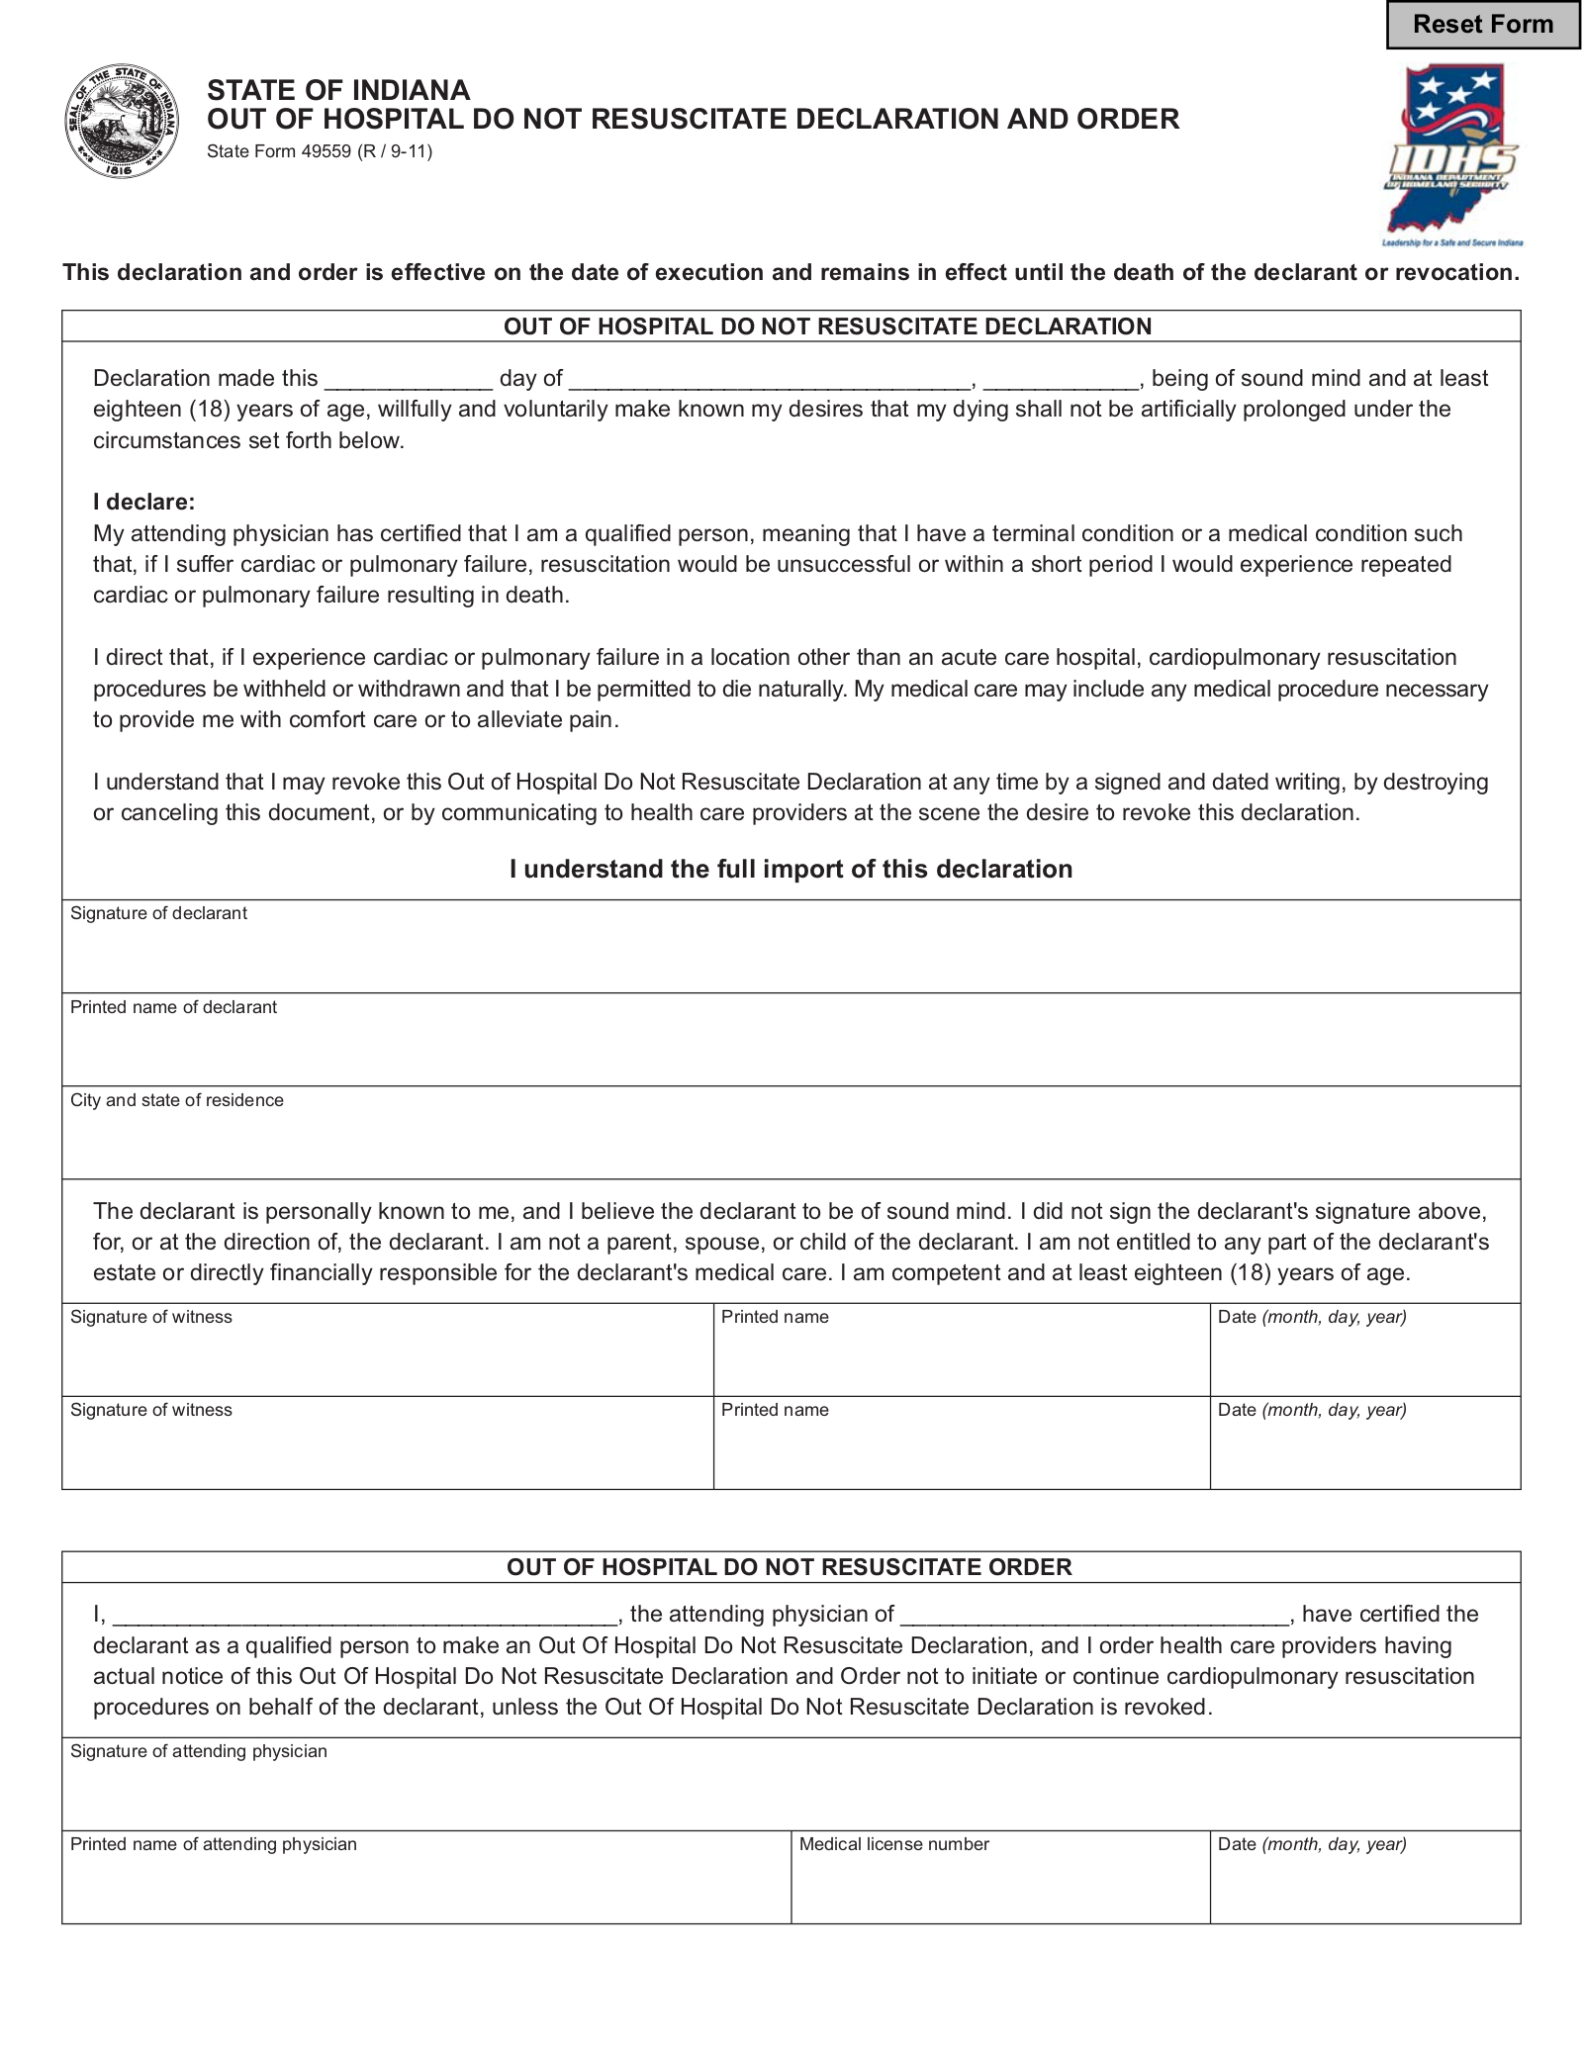 Indiana Advance Directive Form